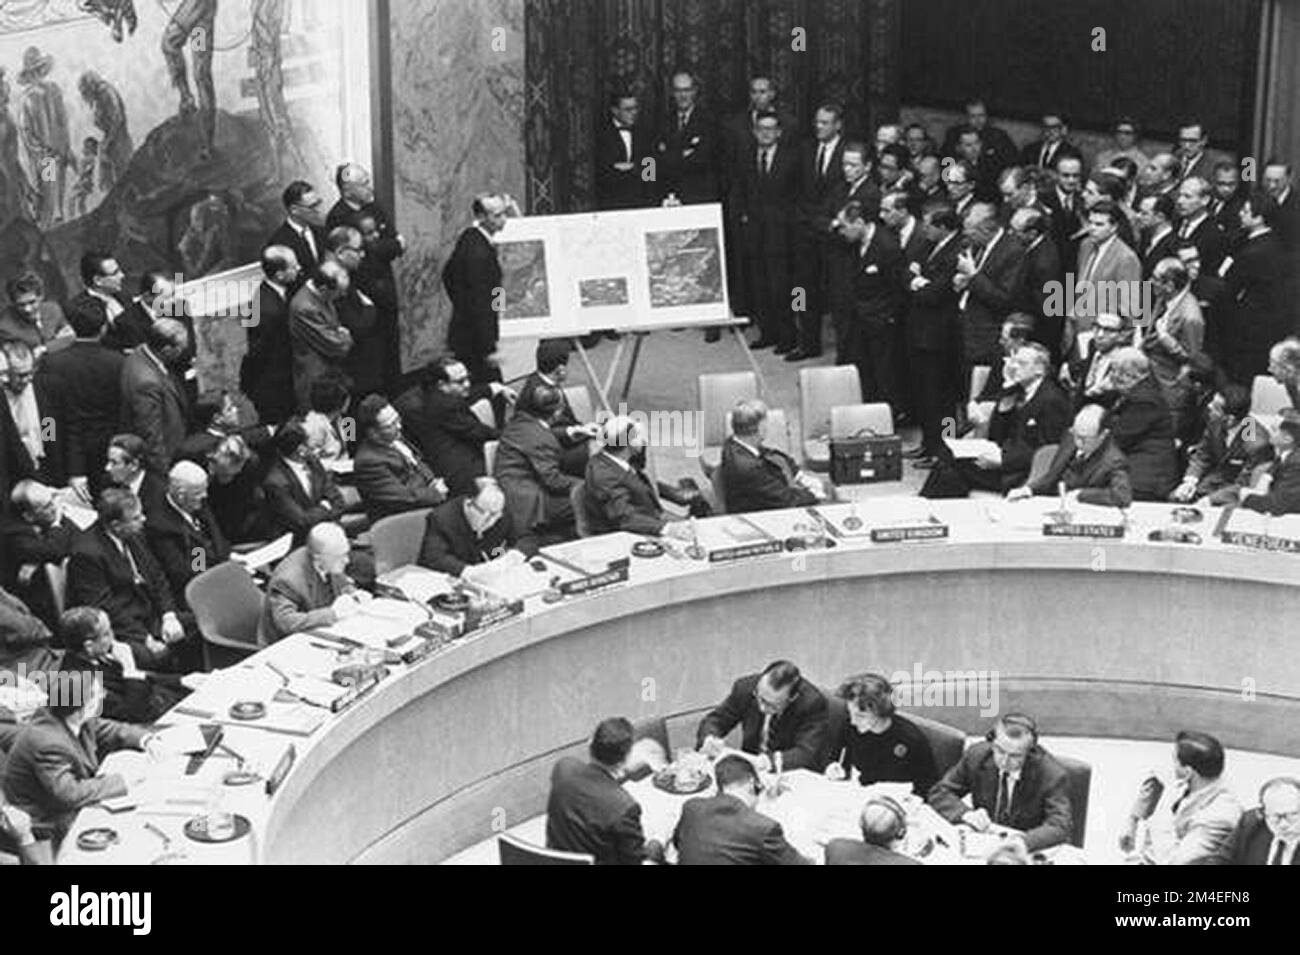 Adlai Stevenson shows aerial photos of Cuban missiles to the United Nations, October 25, 1962. Stock Photo